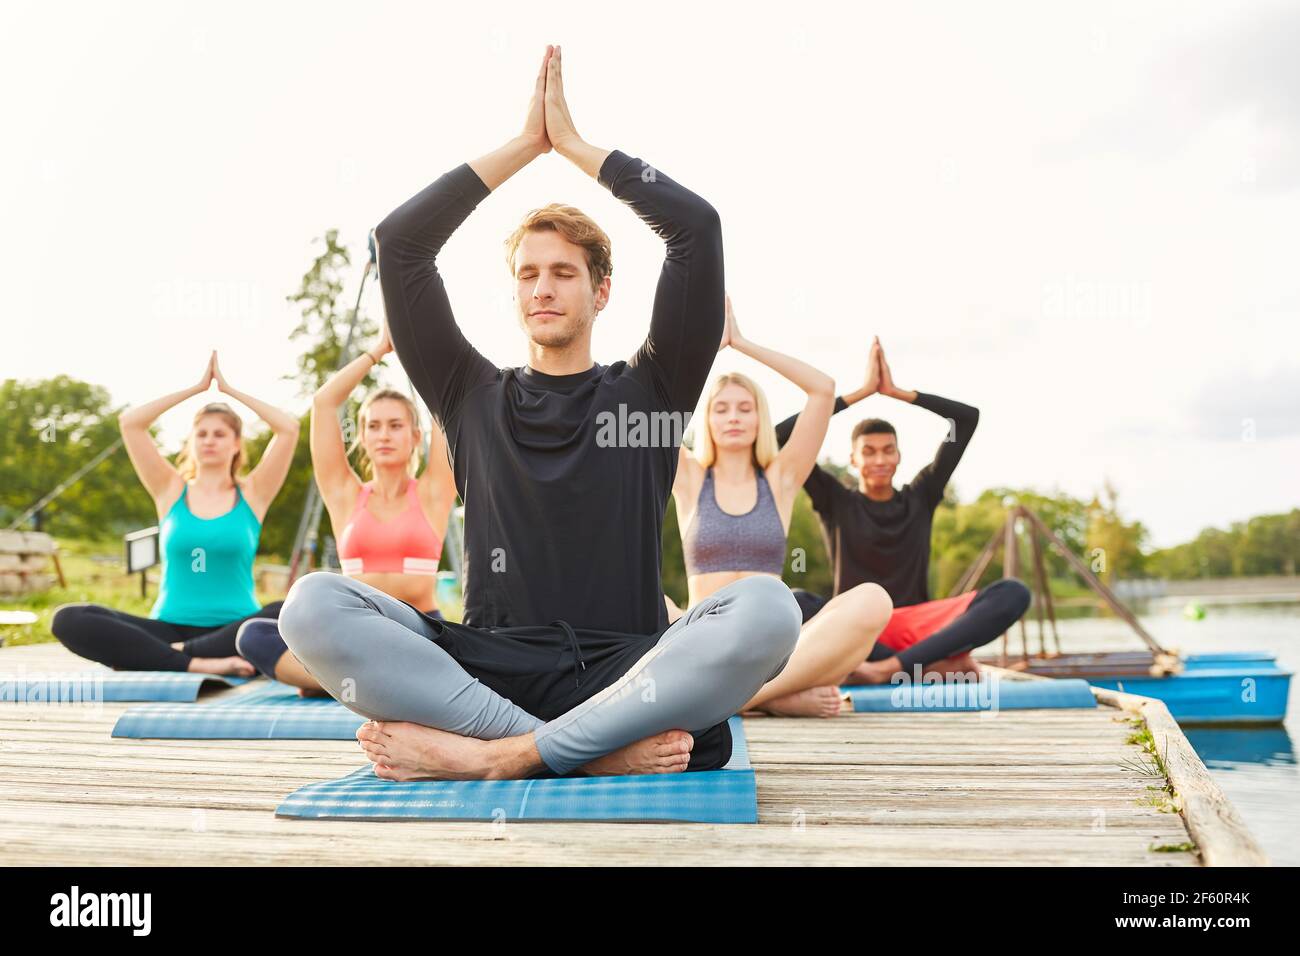 Group of people doing a yoga meditation in nature for relaxation and enlightenment Stock Photo